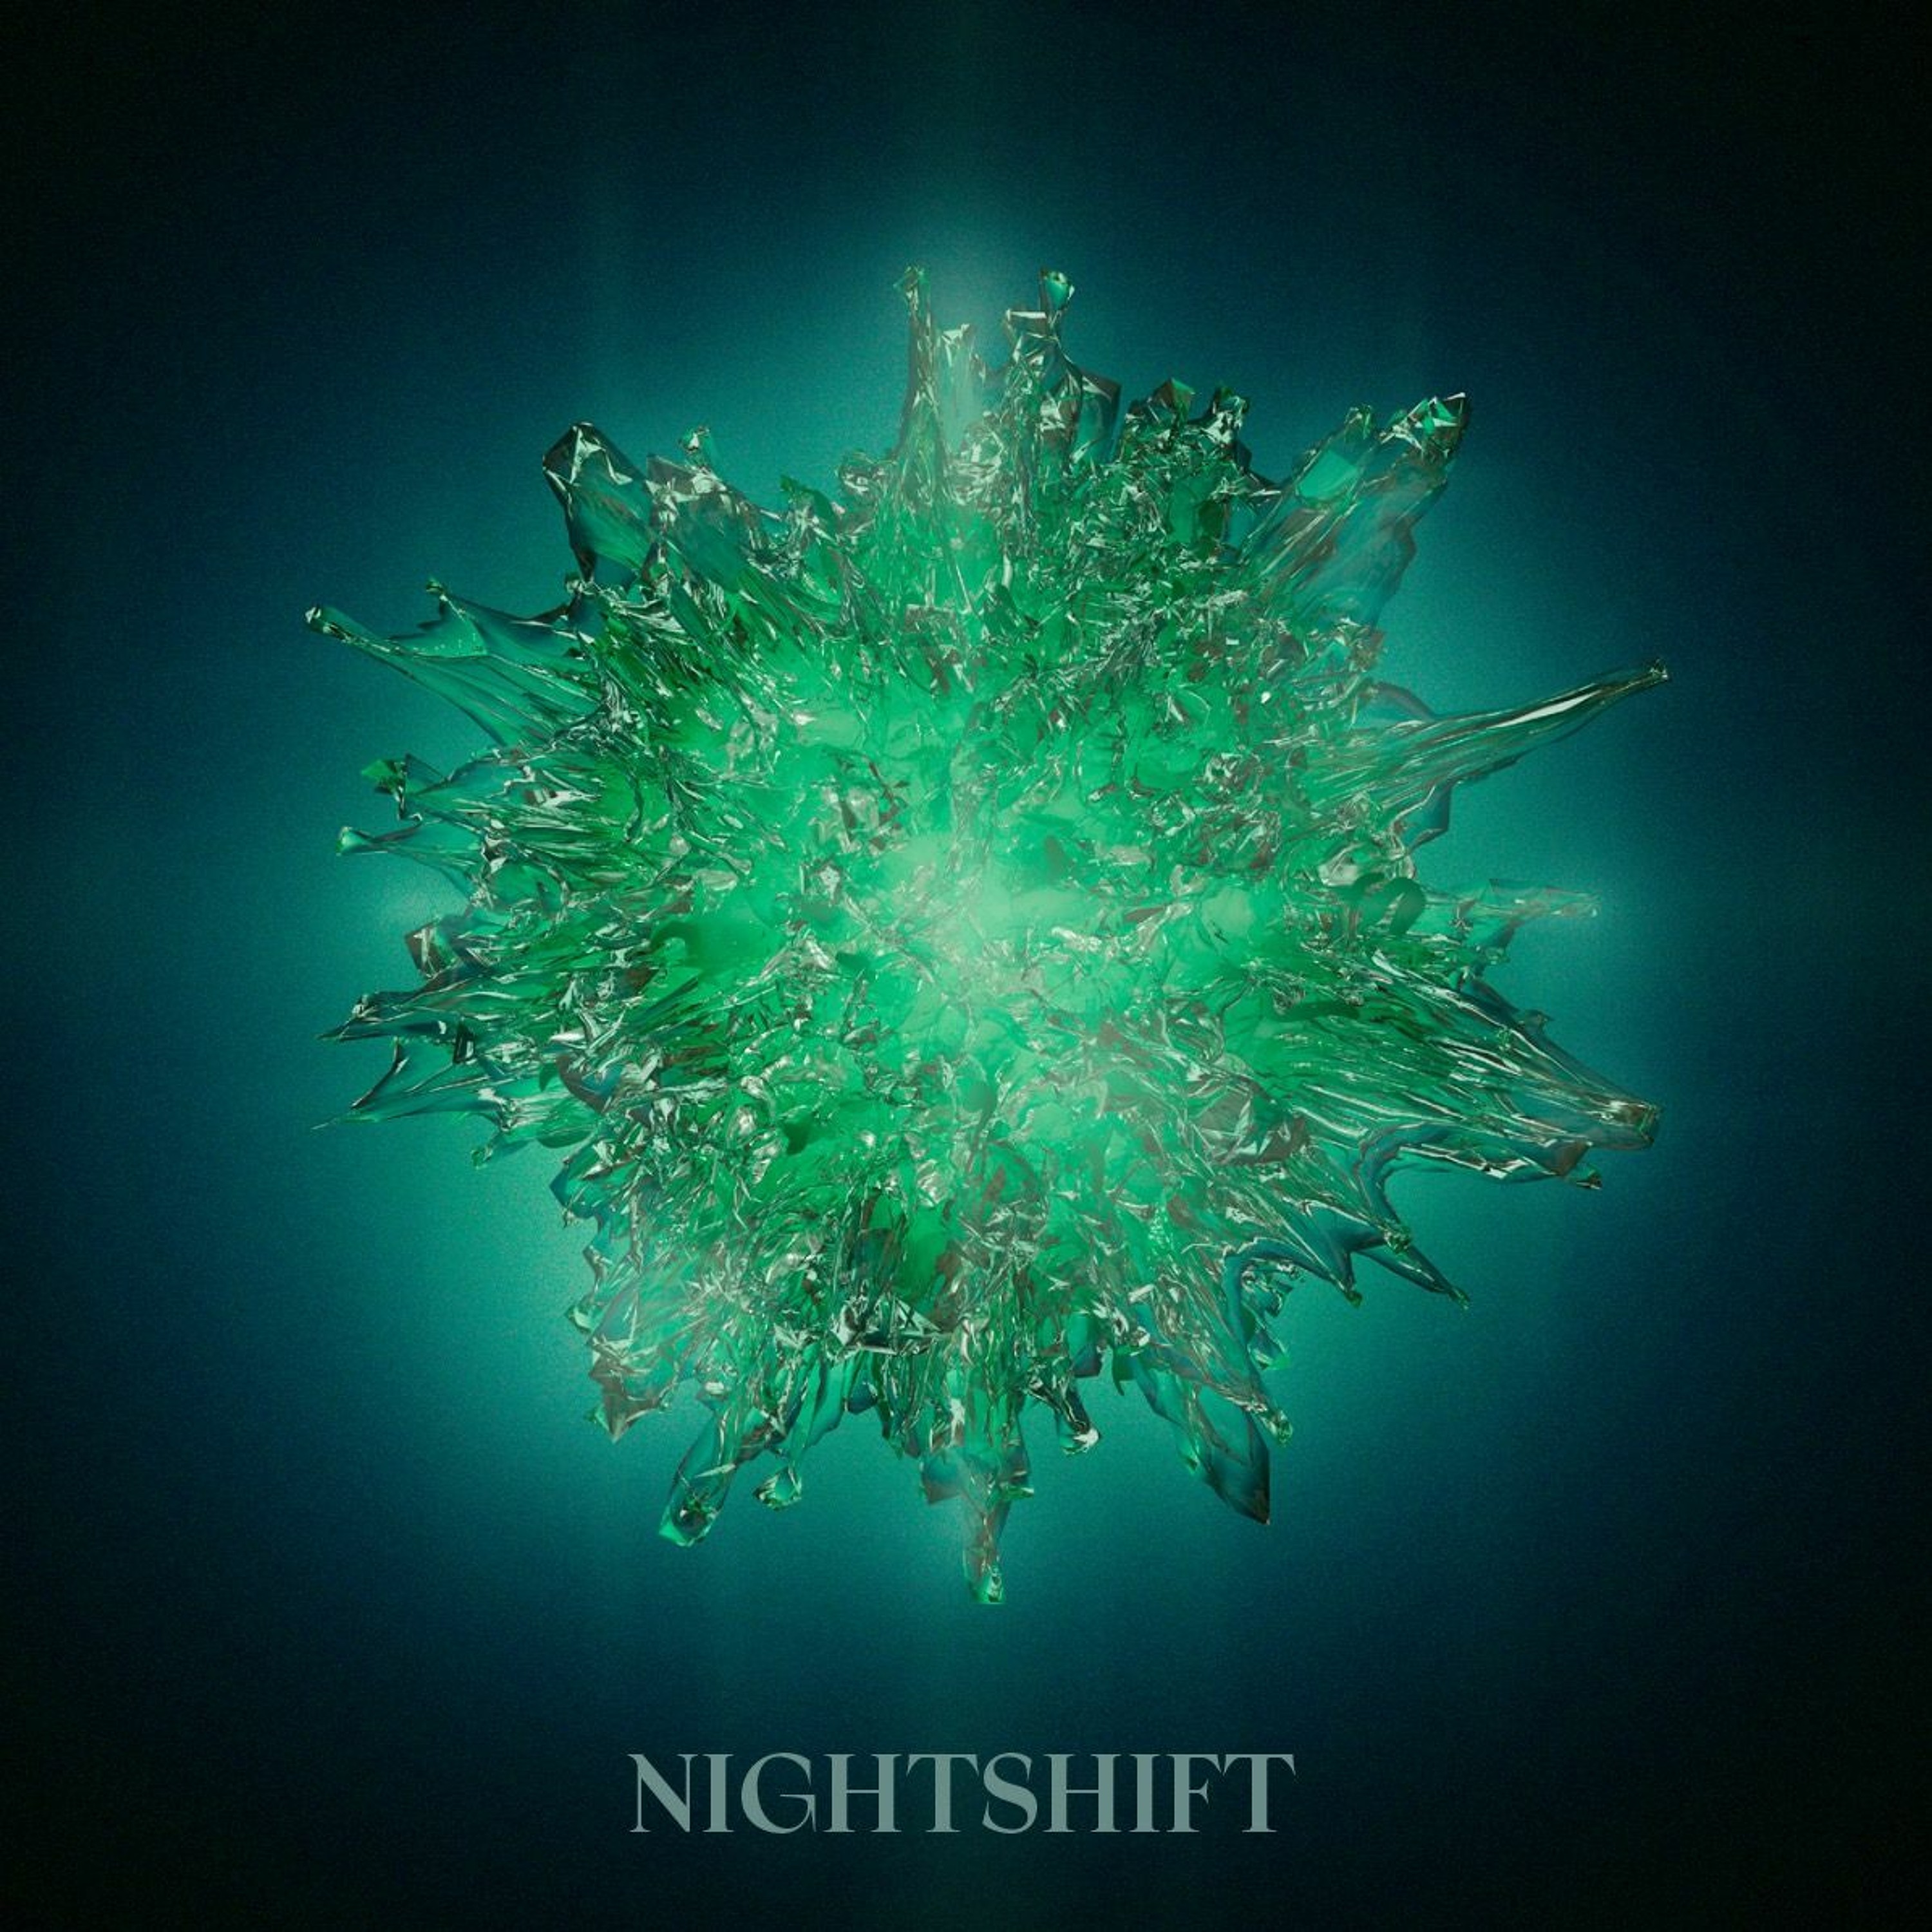 Nightshift #1: The smallest sounds – discovering the subtleties of lowercase